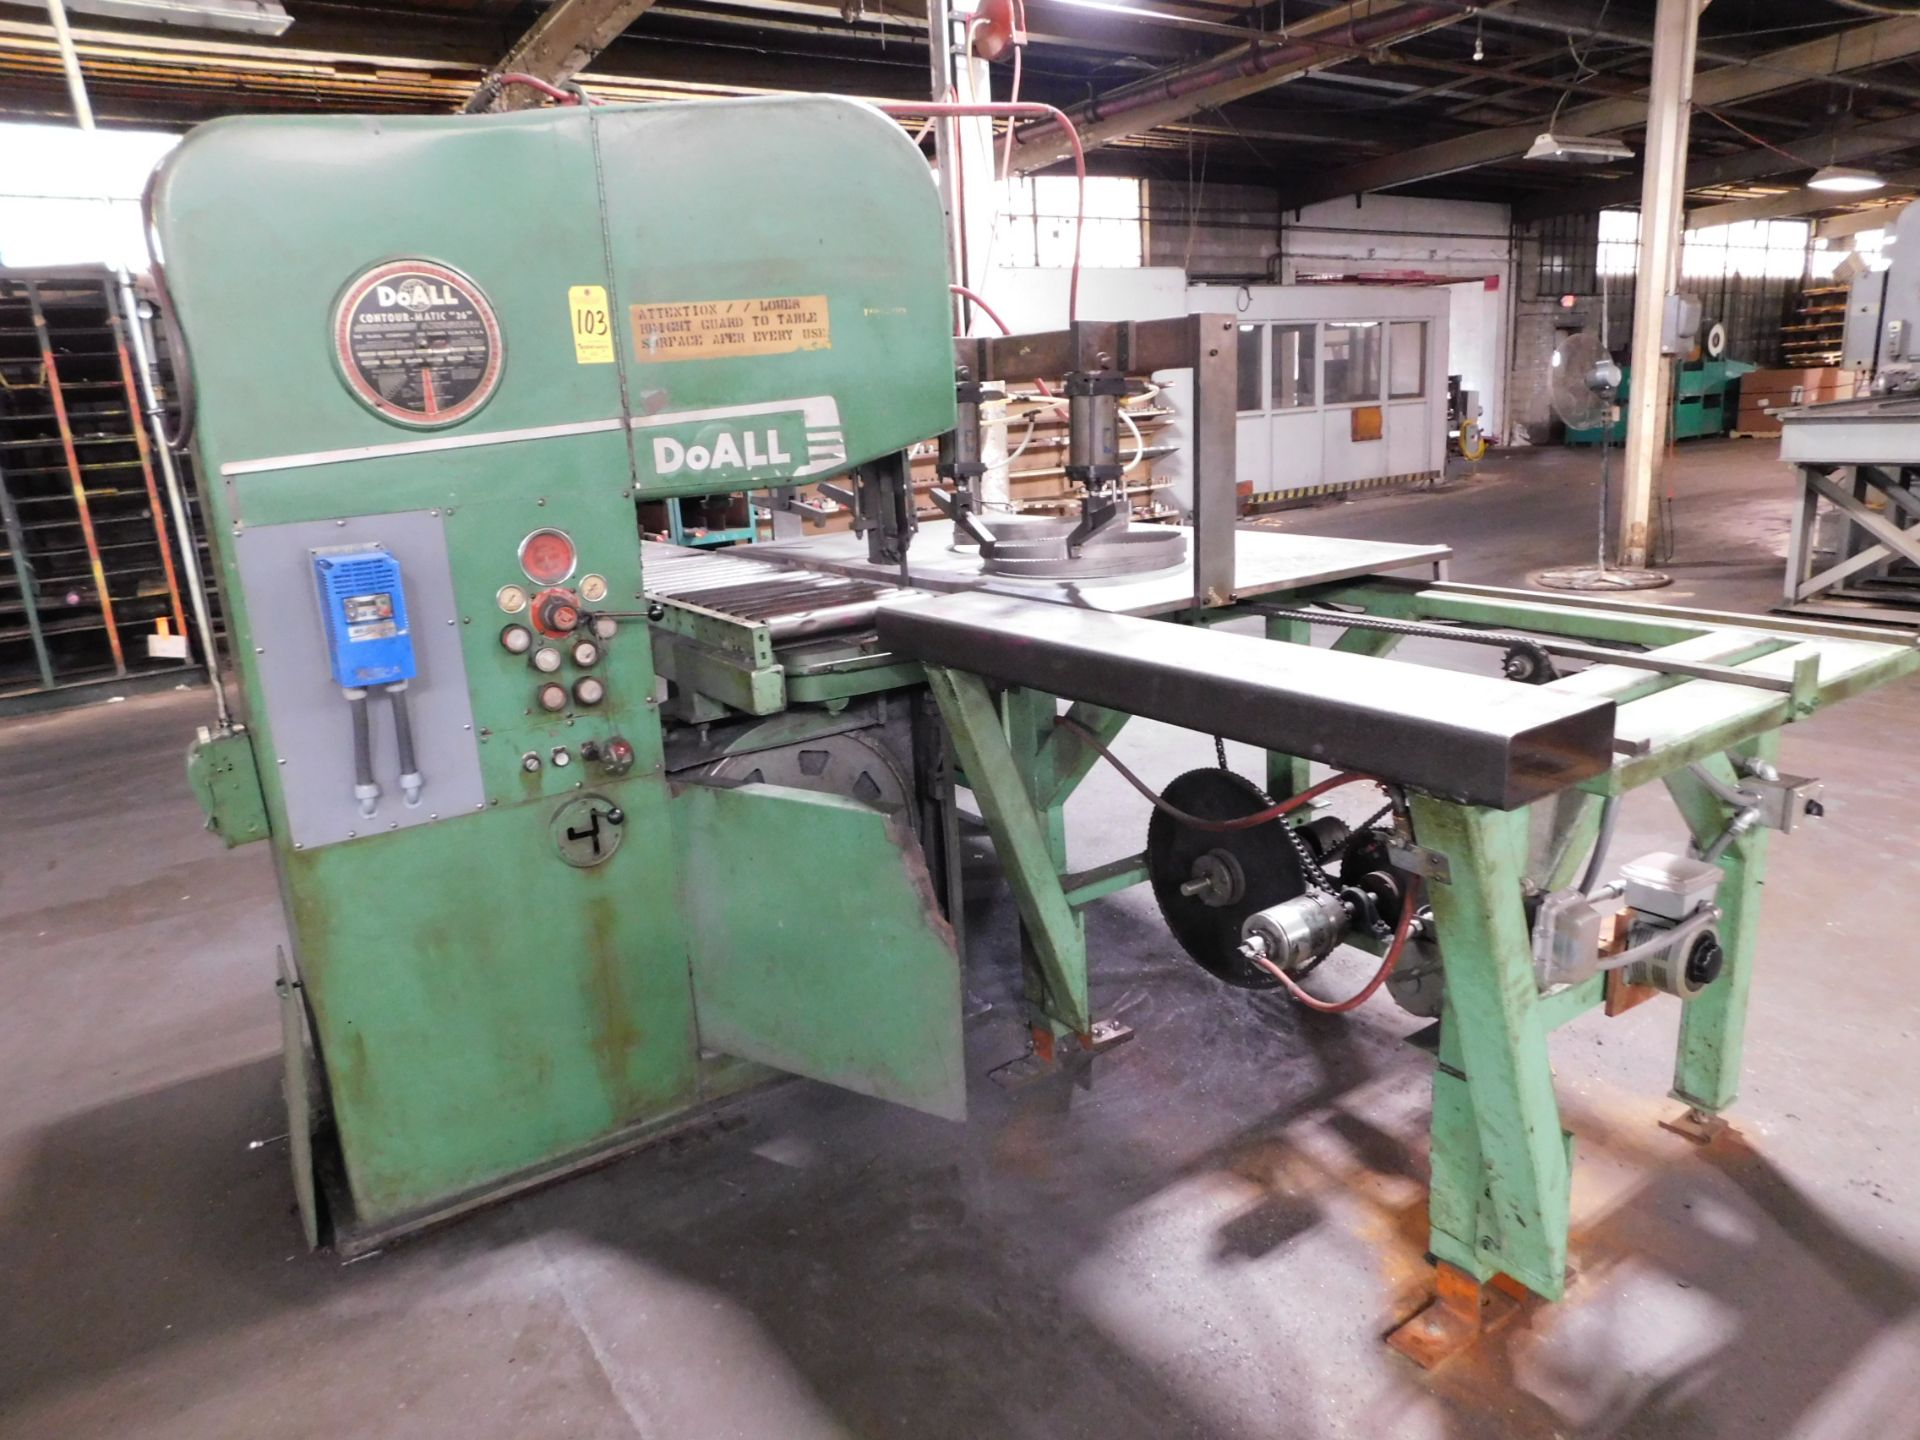 Do-All Model 2613-3 Vertical Plate Saw, s/n 128-60208, 26” Throat, 13” Max. Vertical Height, 43 1/2”